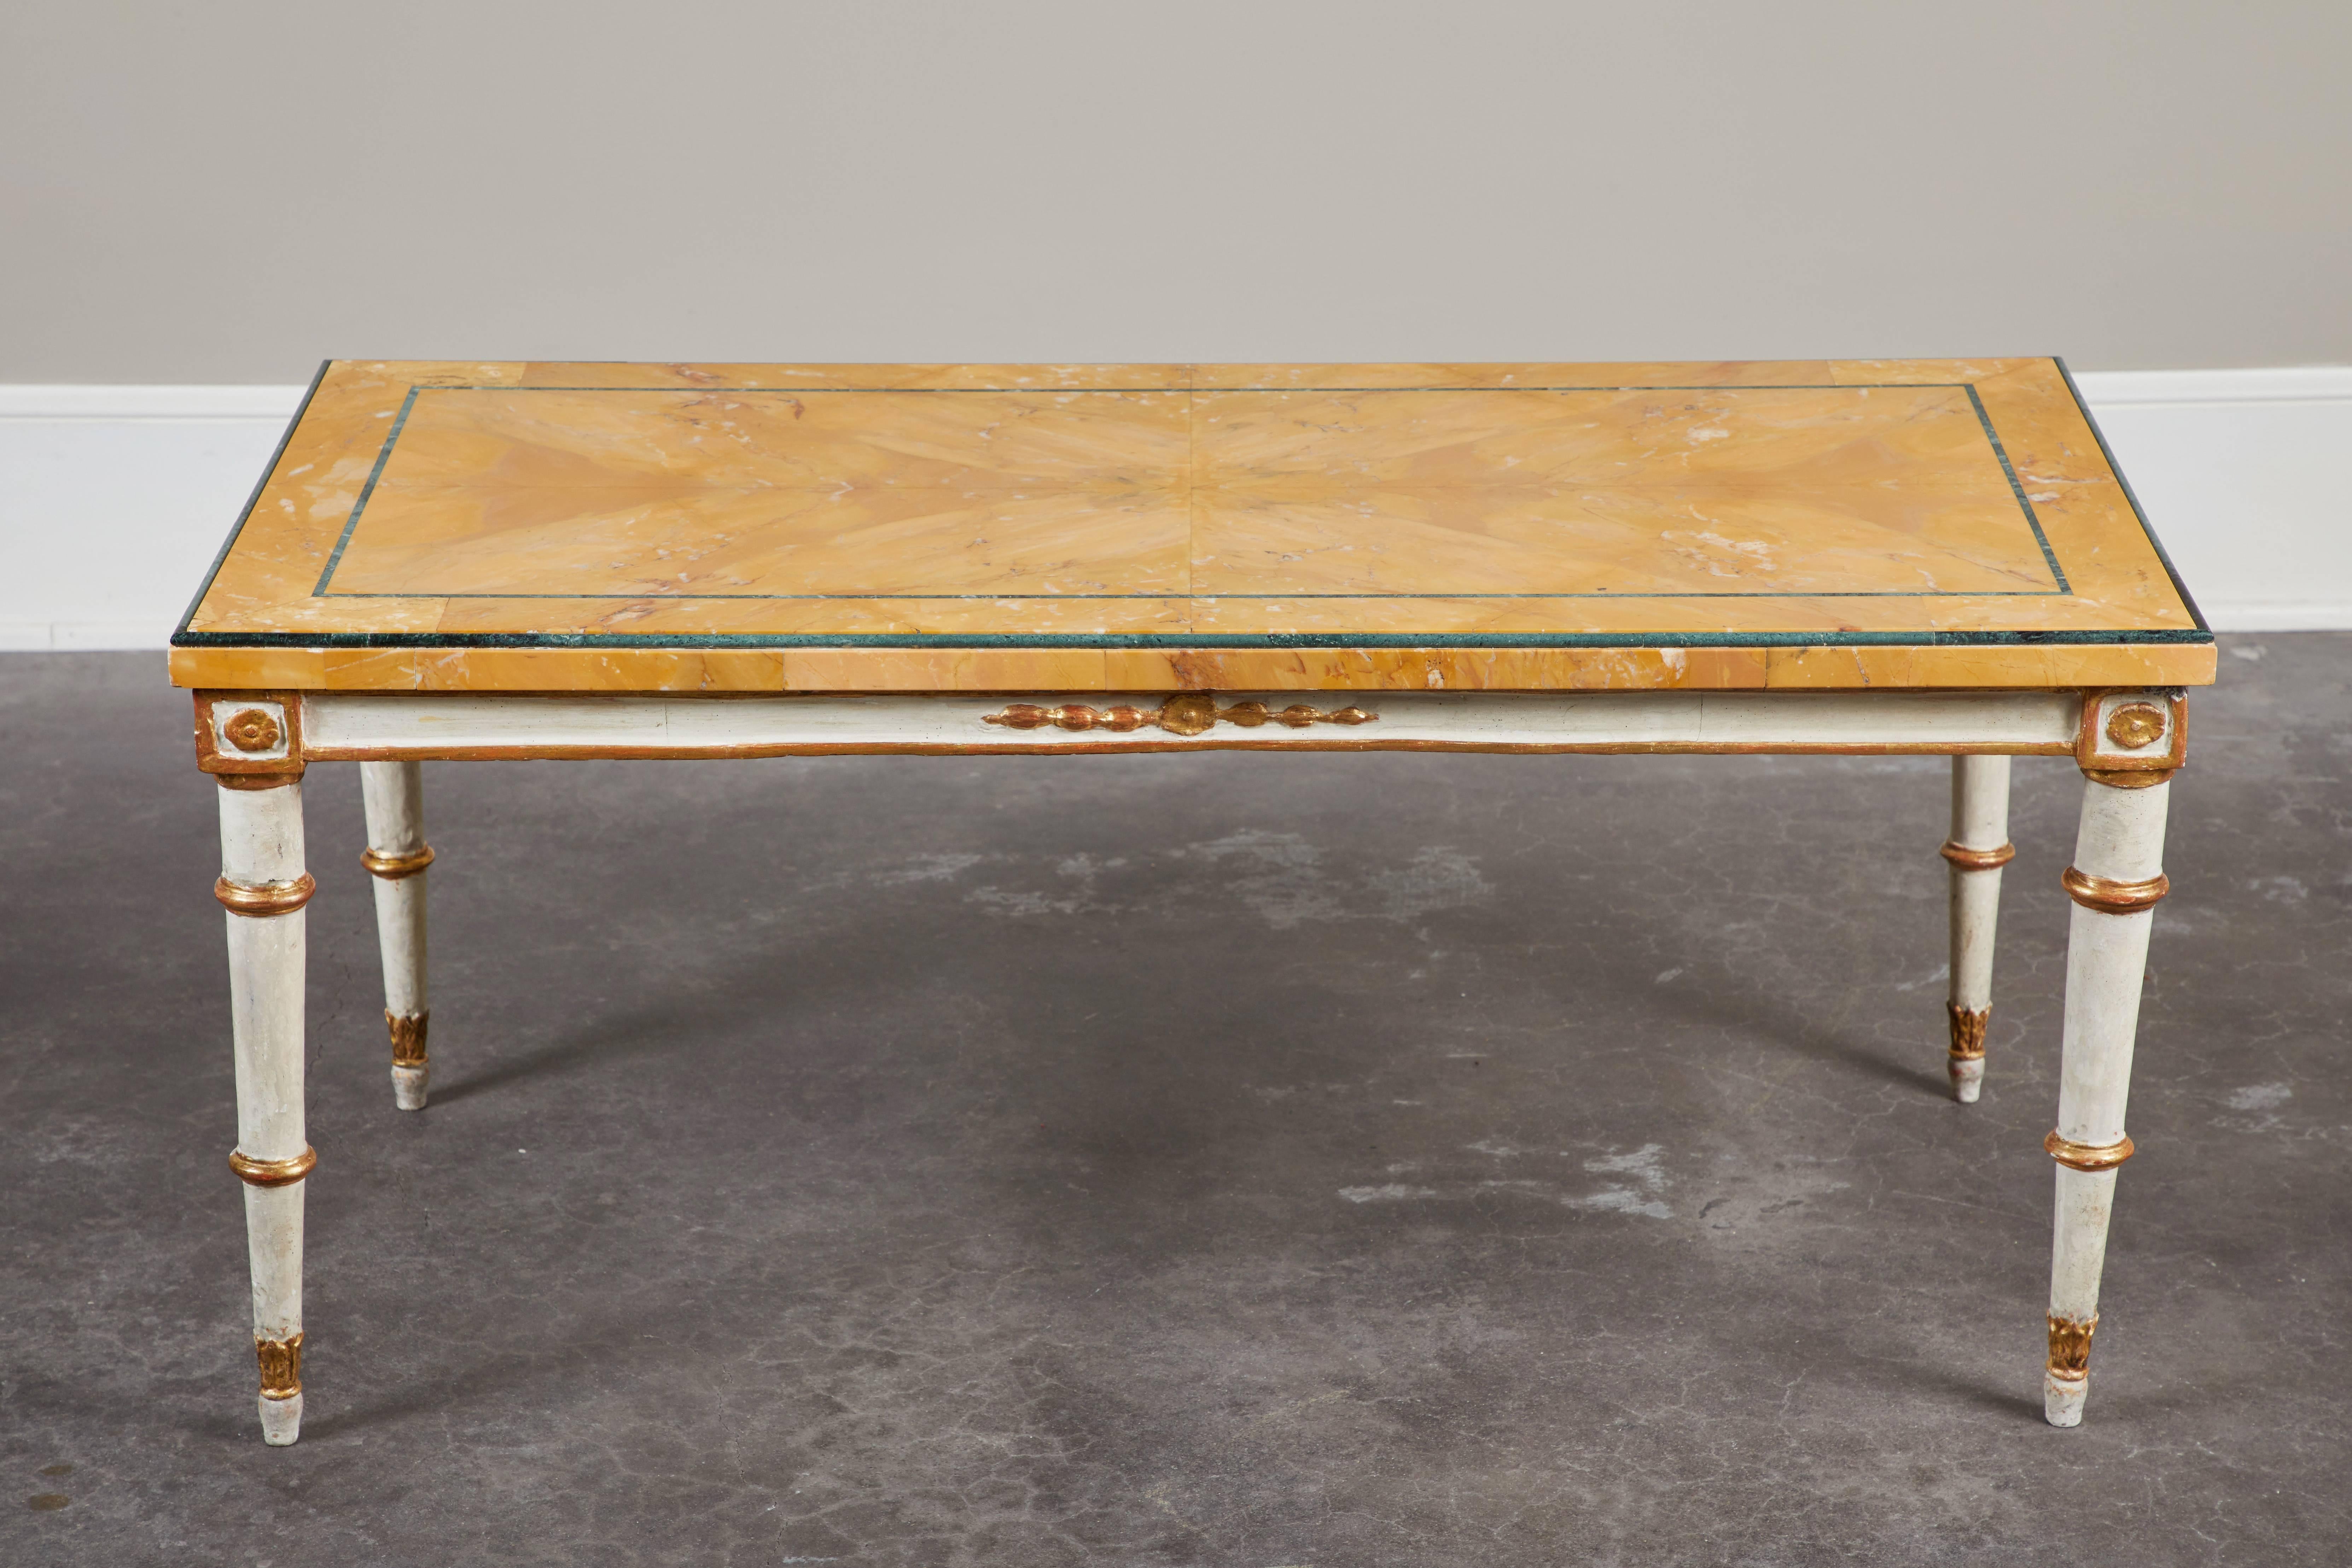 A 19th century marble-top and pine base coffee table. The top is Italian Gallo Antigo marble, with a pine base made from a Swedish Gustavian stool, circa 1800s.